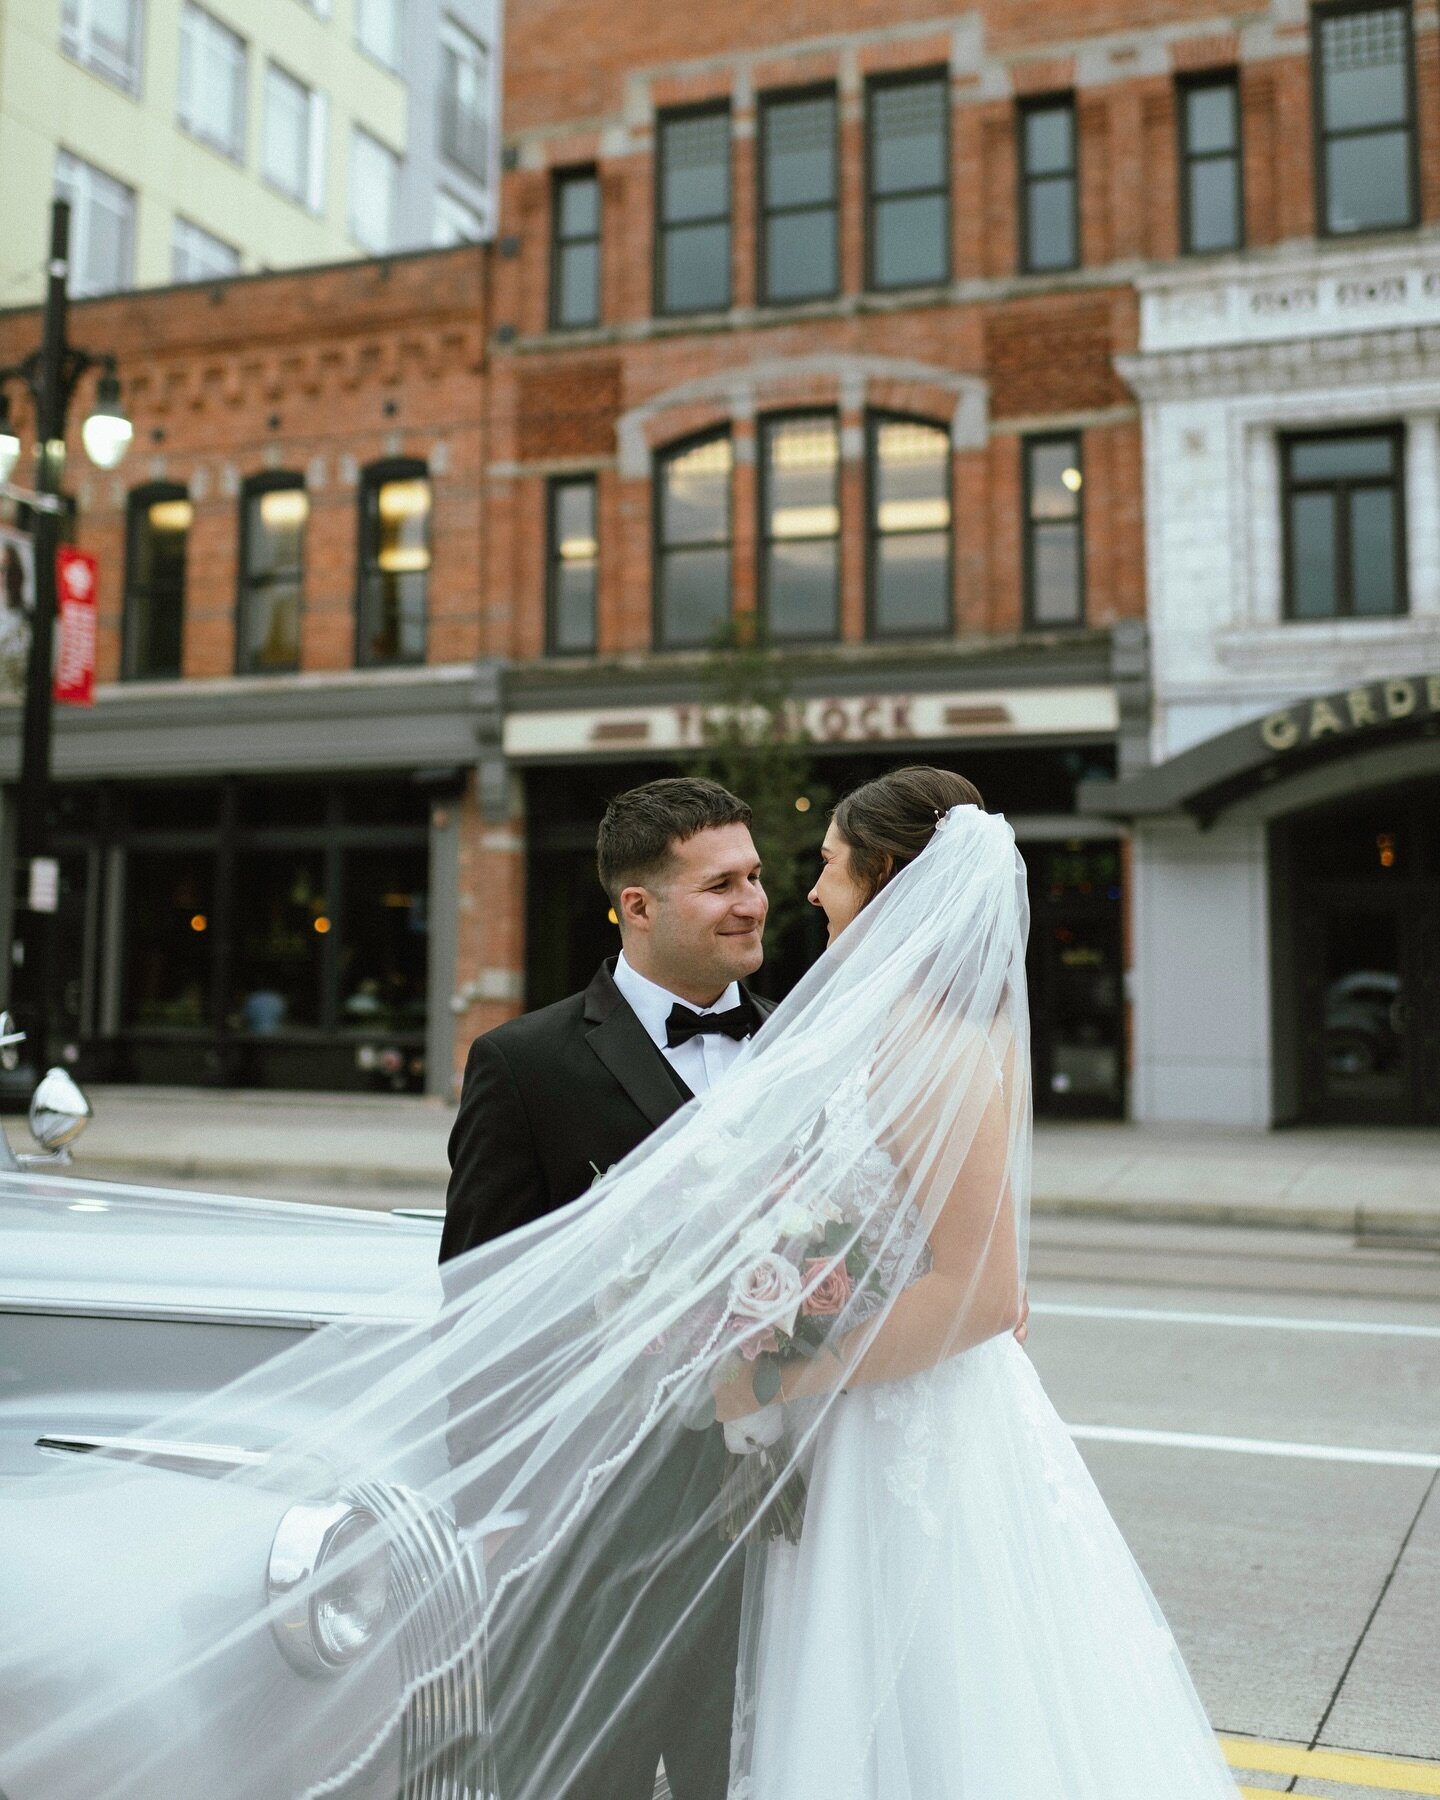 A night to remember in Downtown Detroit

Second shot for @kerogersphotography 

#weddingday #engagement #michiganwedding #midwestphotographer #michiganbride #septemberwedding #detroitmi #detroitweddingphotographer #michiganengagementphotographer #det